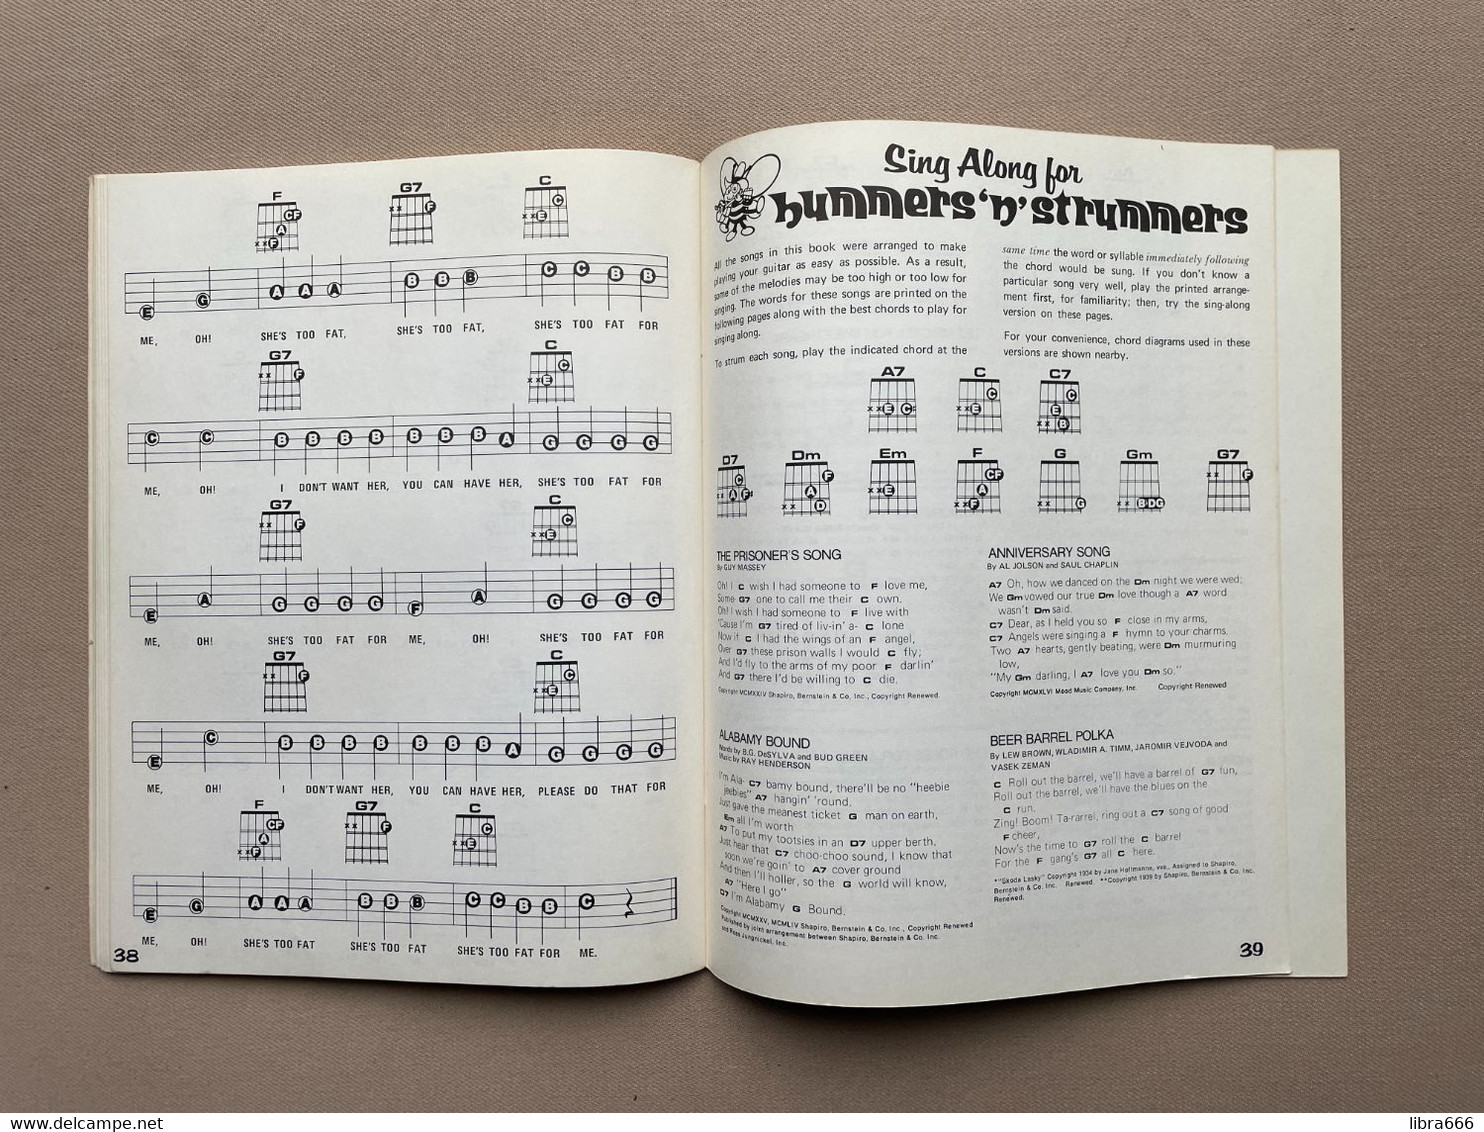 EASY-PLAY - GUITAR SPEED MUSIC 12 / GOLDEN POPS 1977 (19 songs - 48 pages)